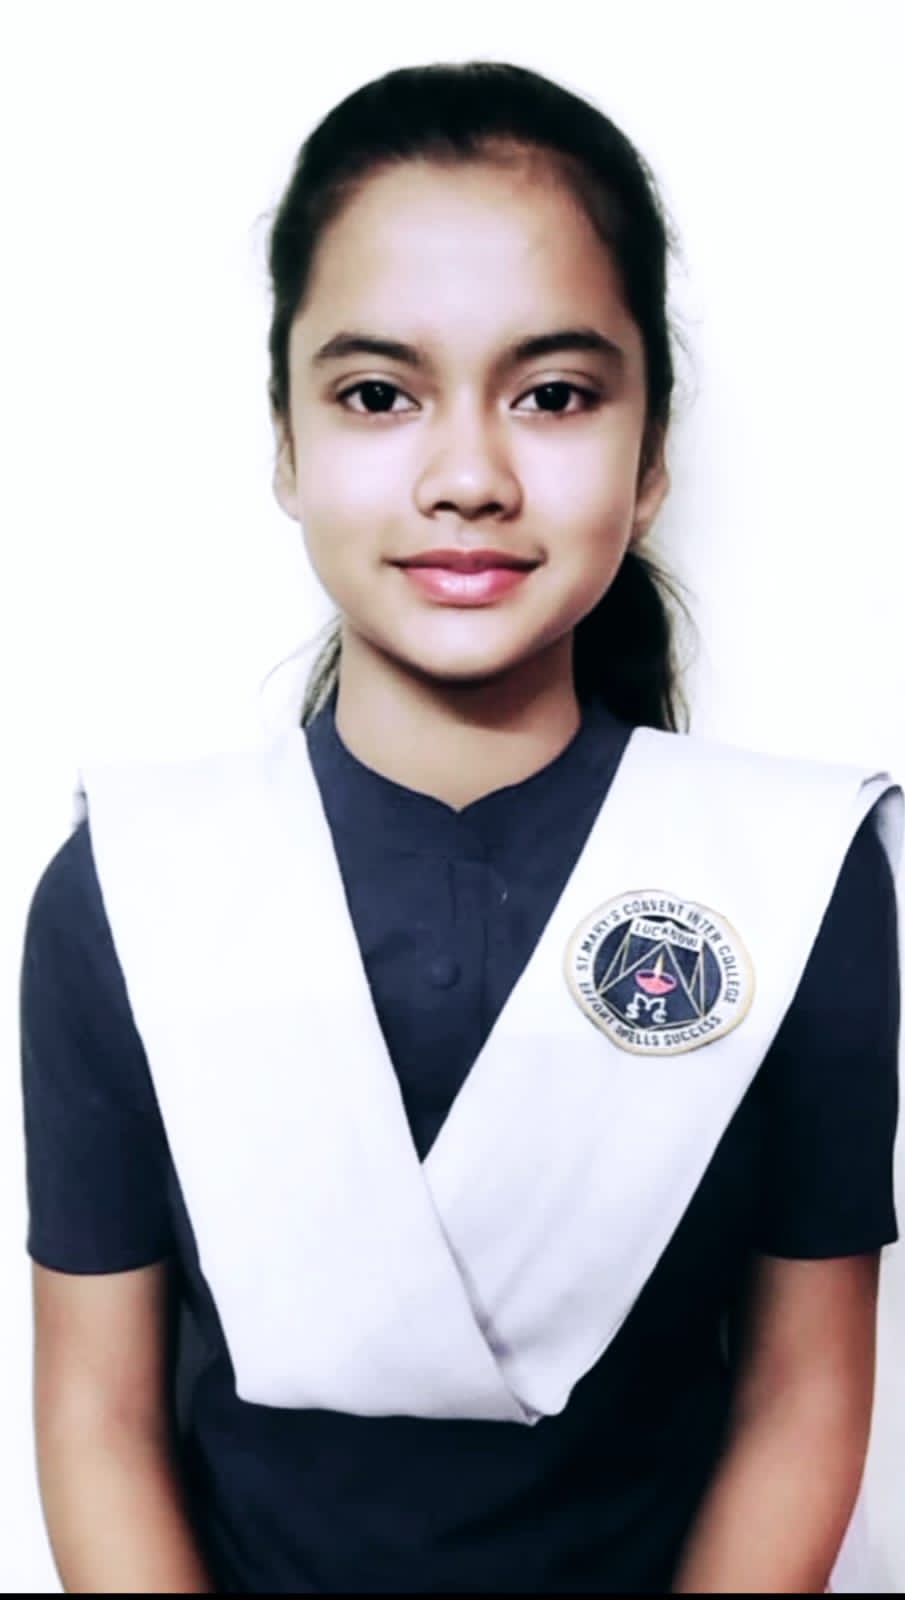 Shagun scored 97.4℅ marks in ICSE board exam, aims to serve the country by becoming an army officer.